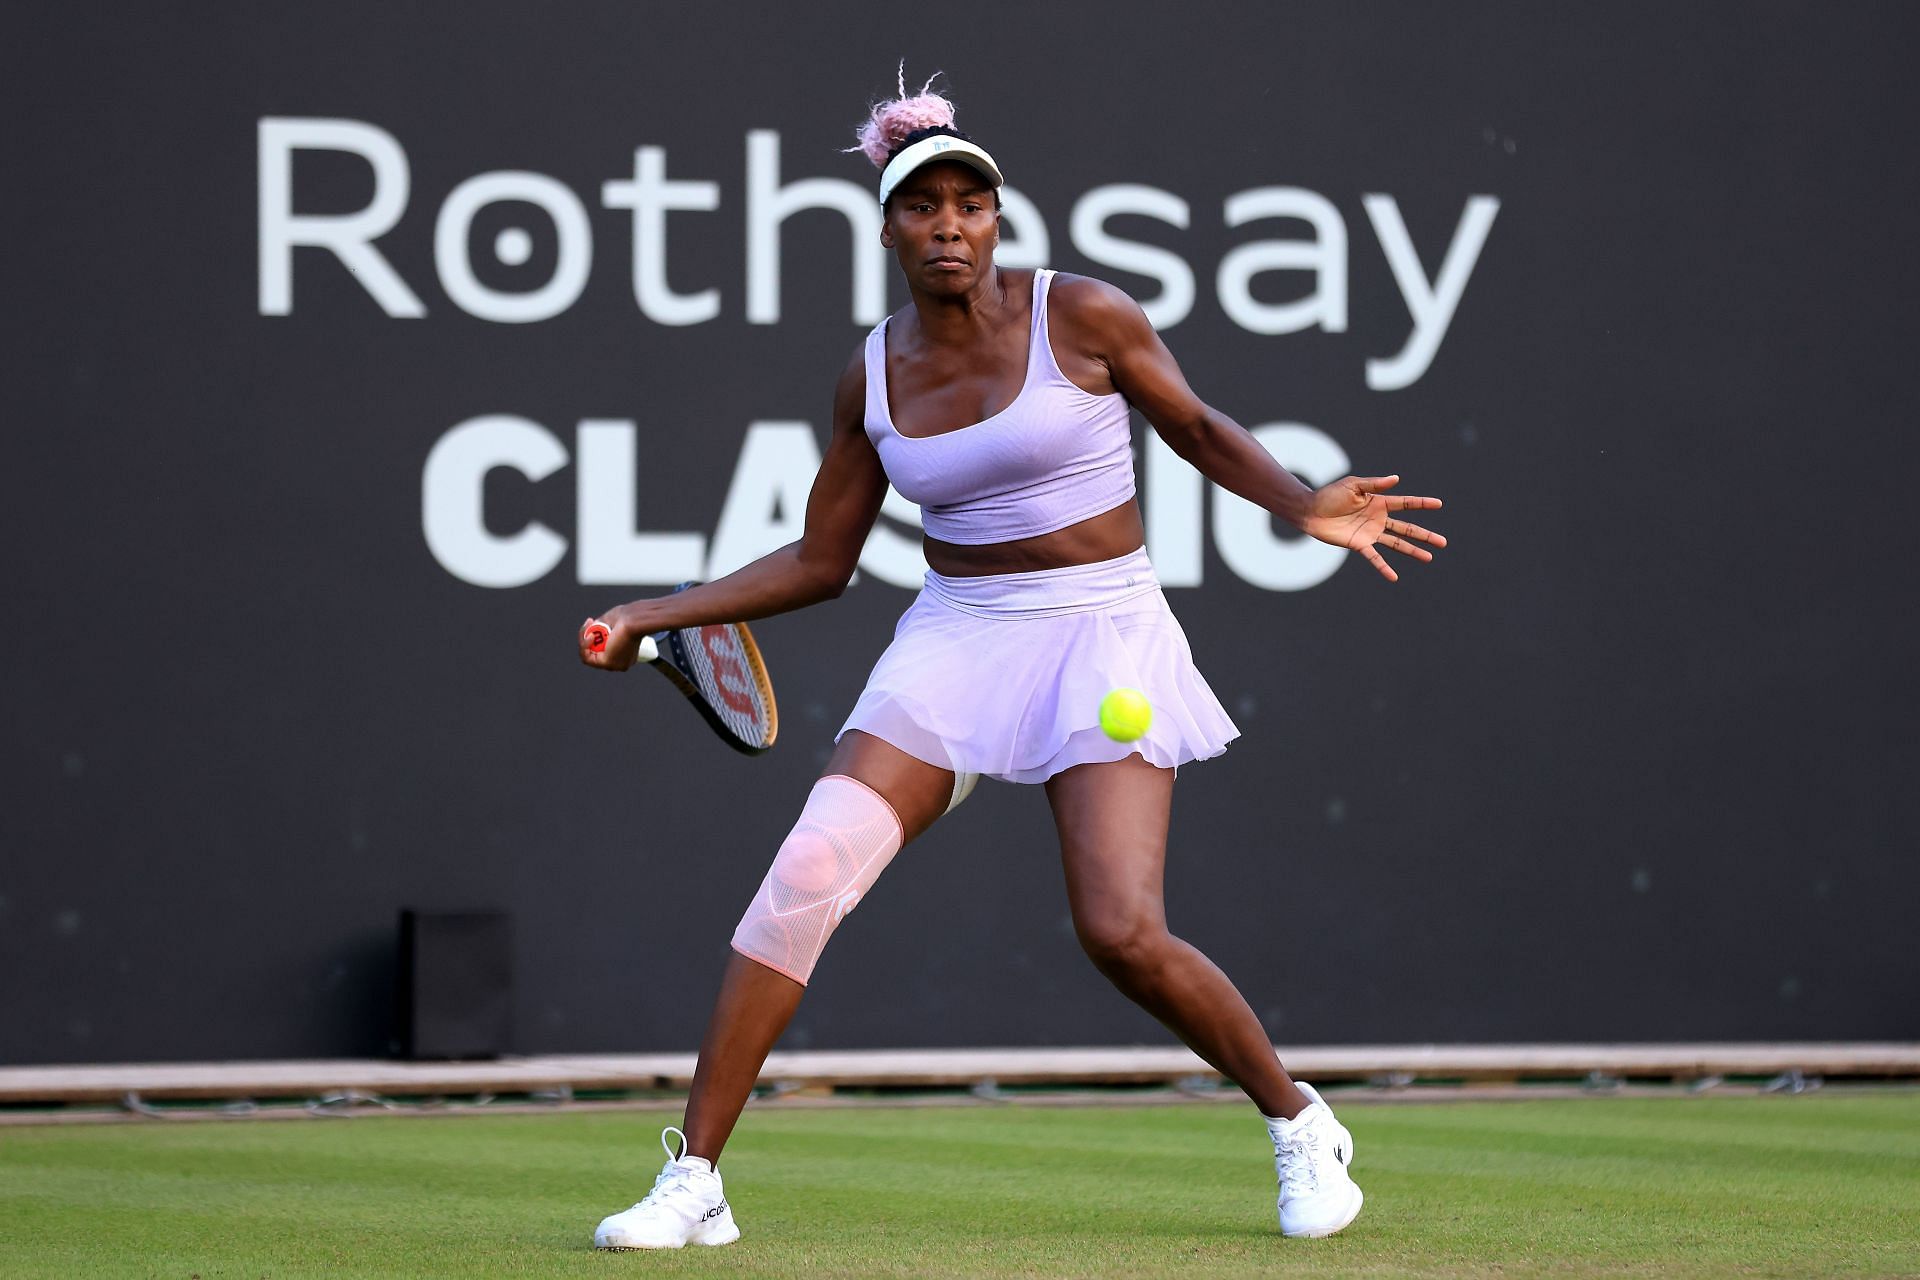 Venus Williams pictured with a knee strap at the Rothesay Classic Birmingham.